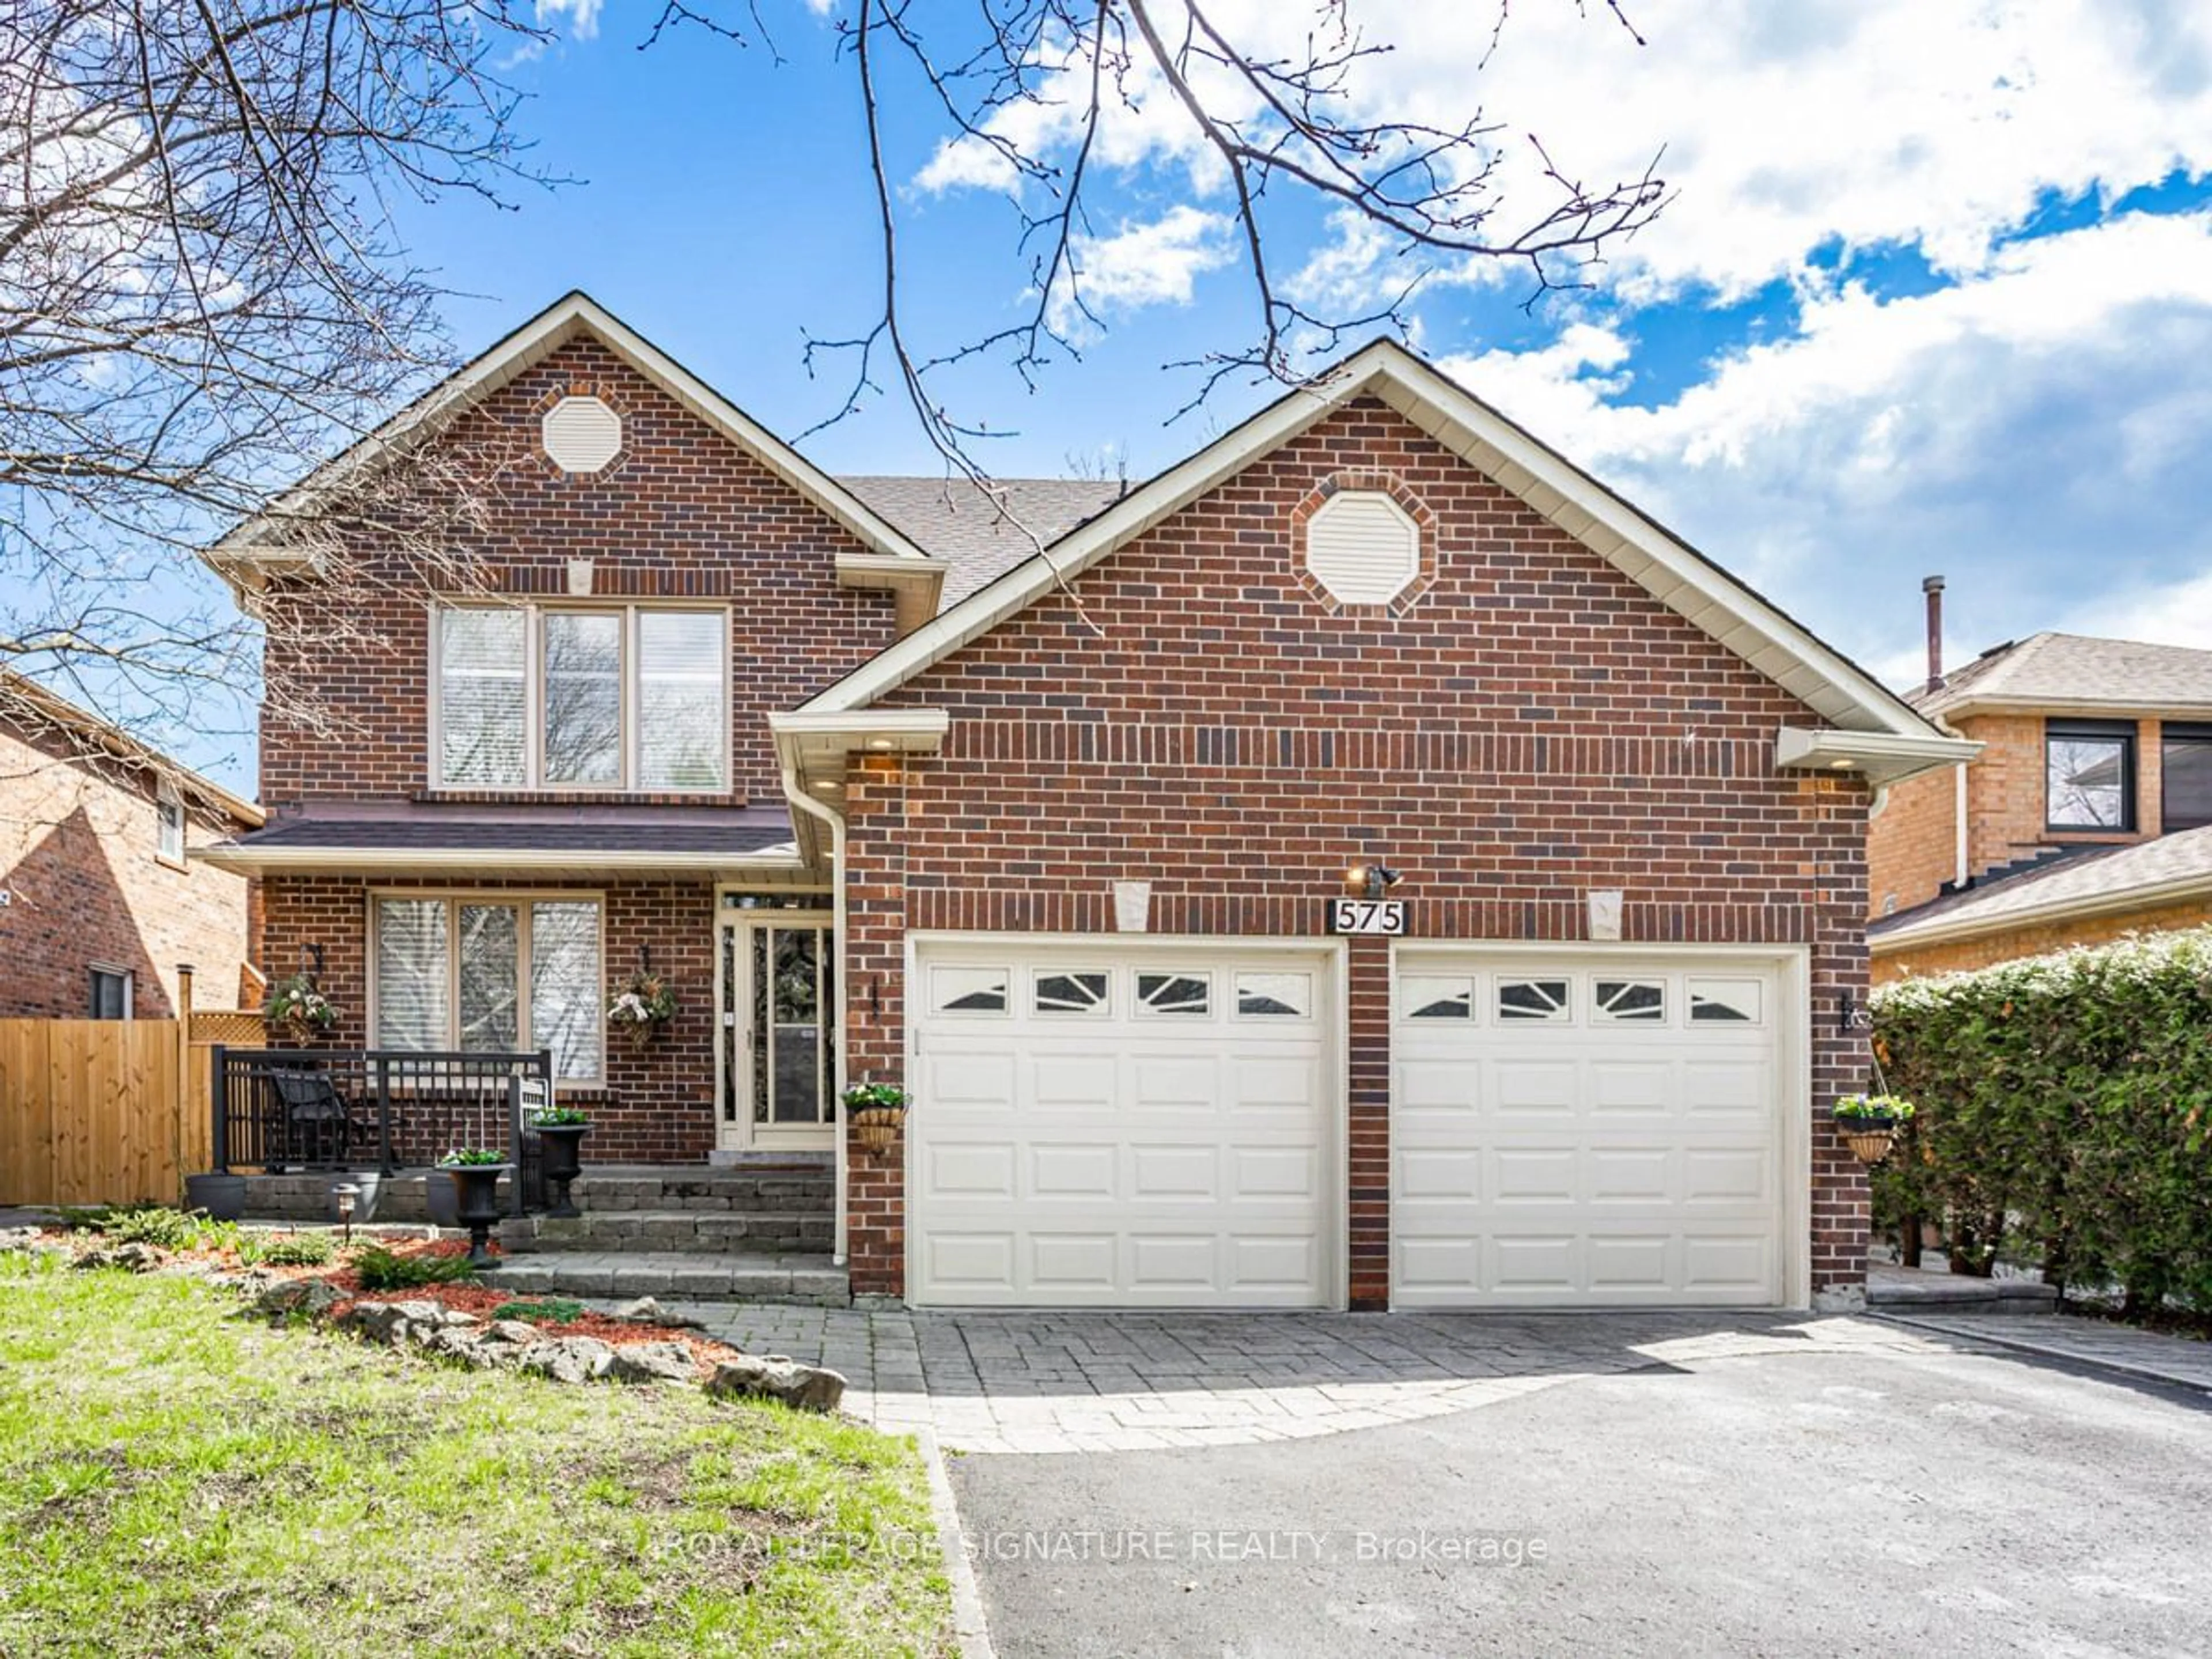 Home with brick exterior material for 575 Sheppard Ave, Pickering Ontario L1V 1G1